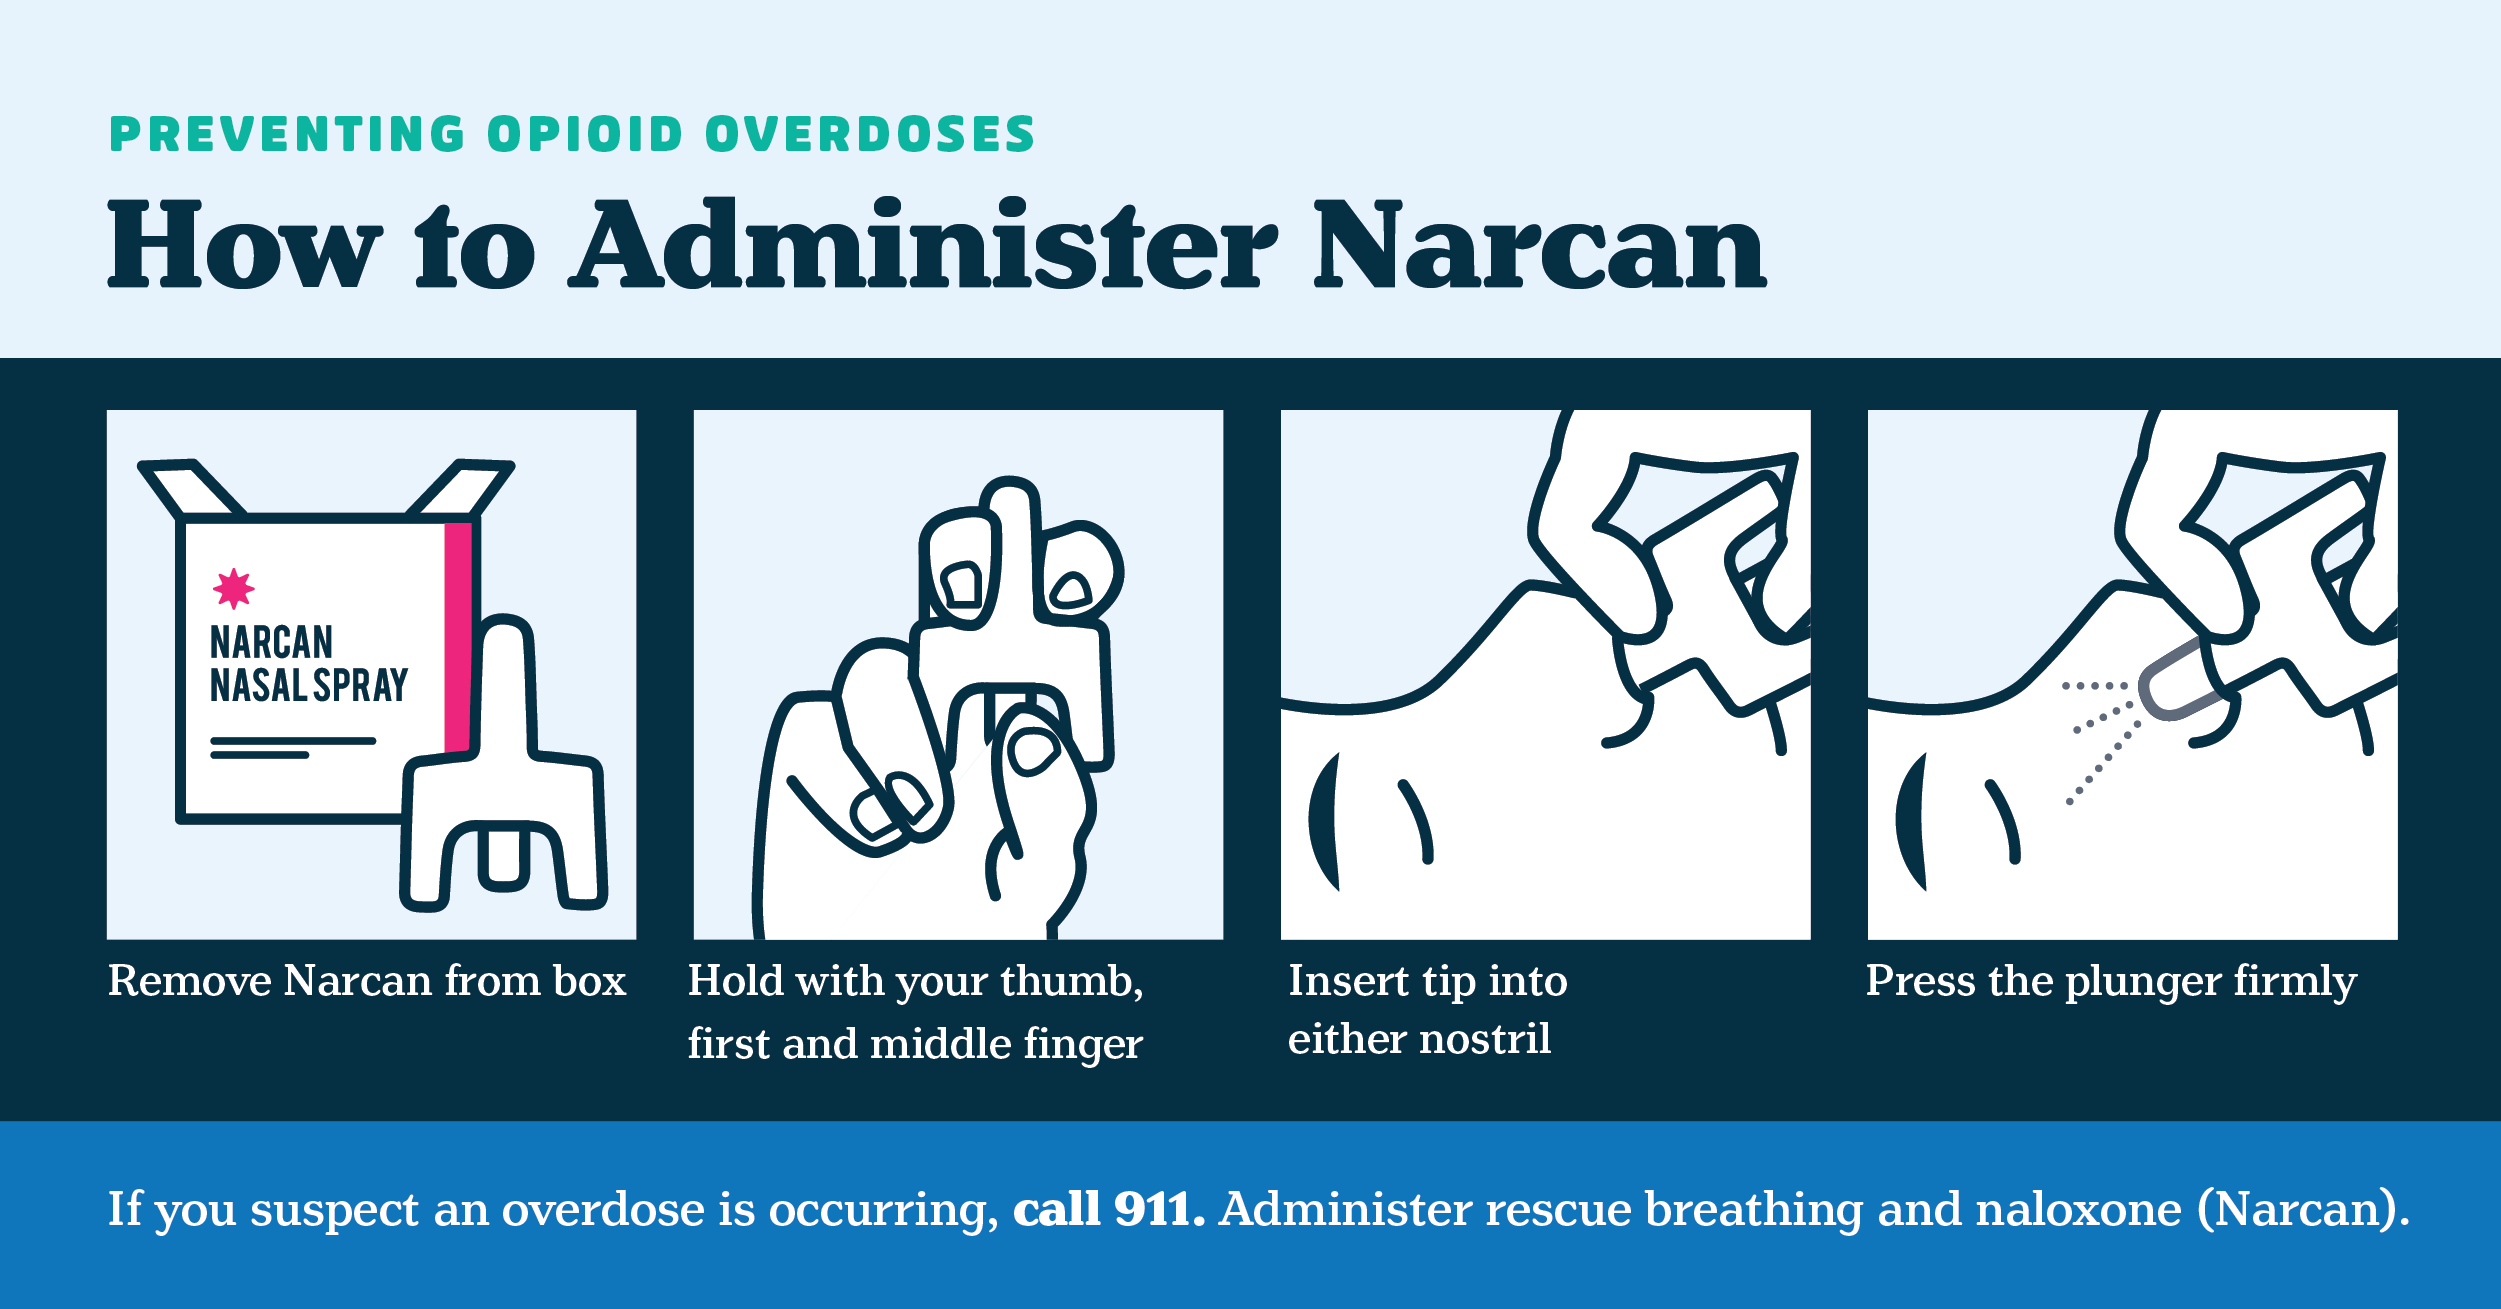 How to administer Narcan